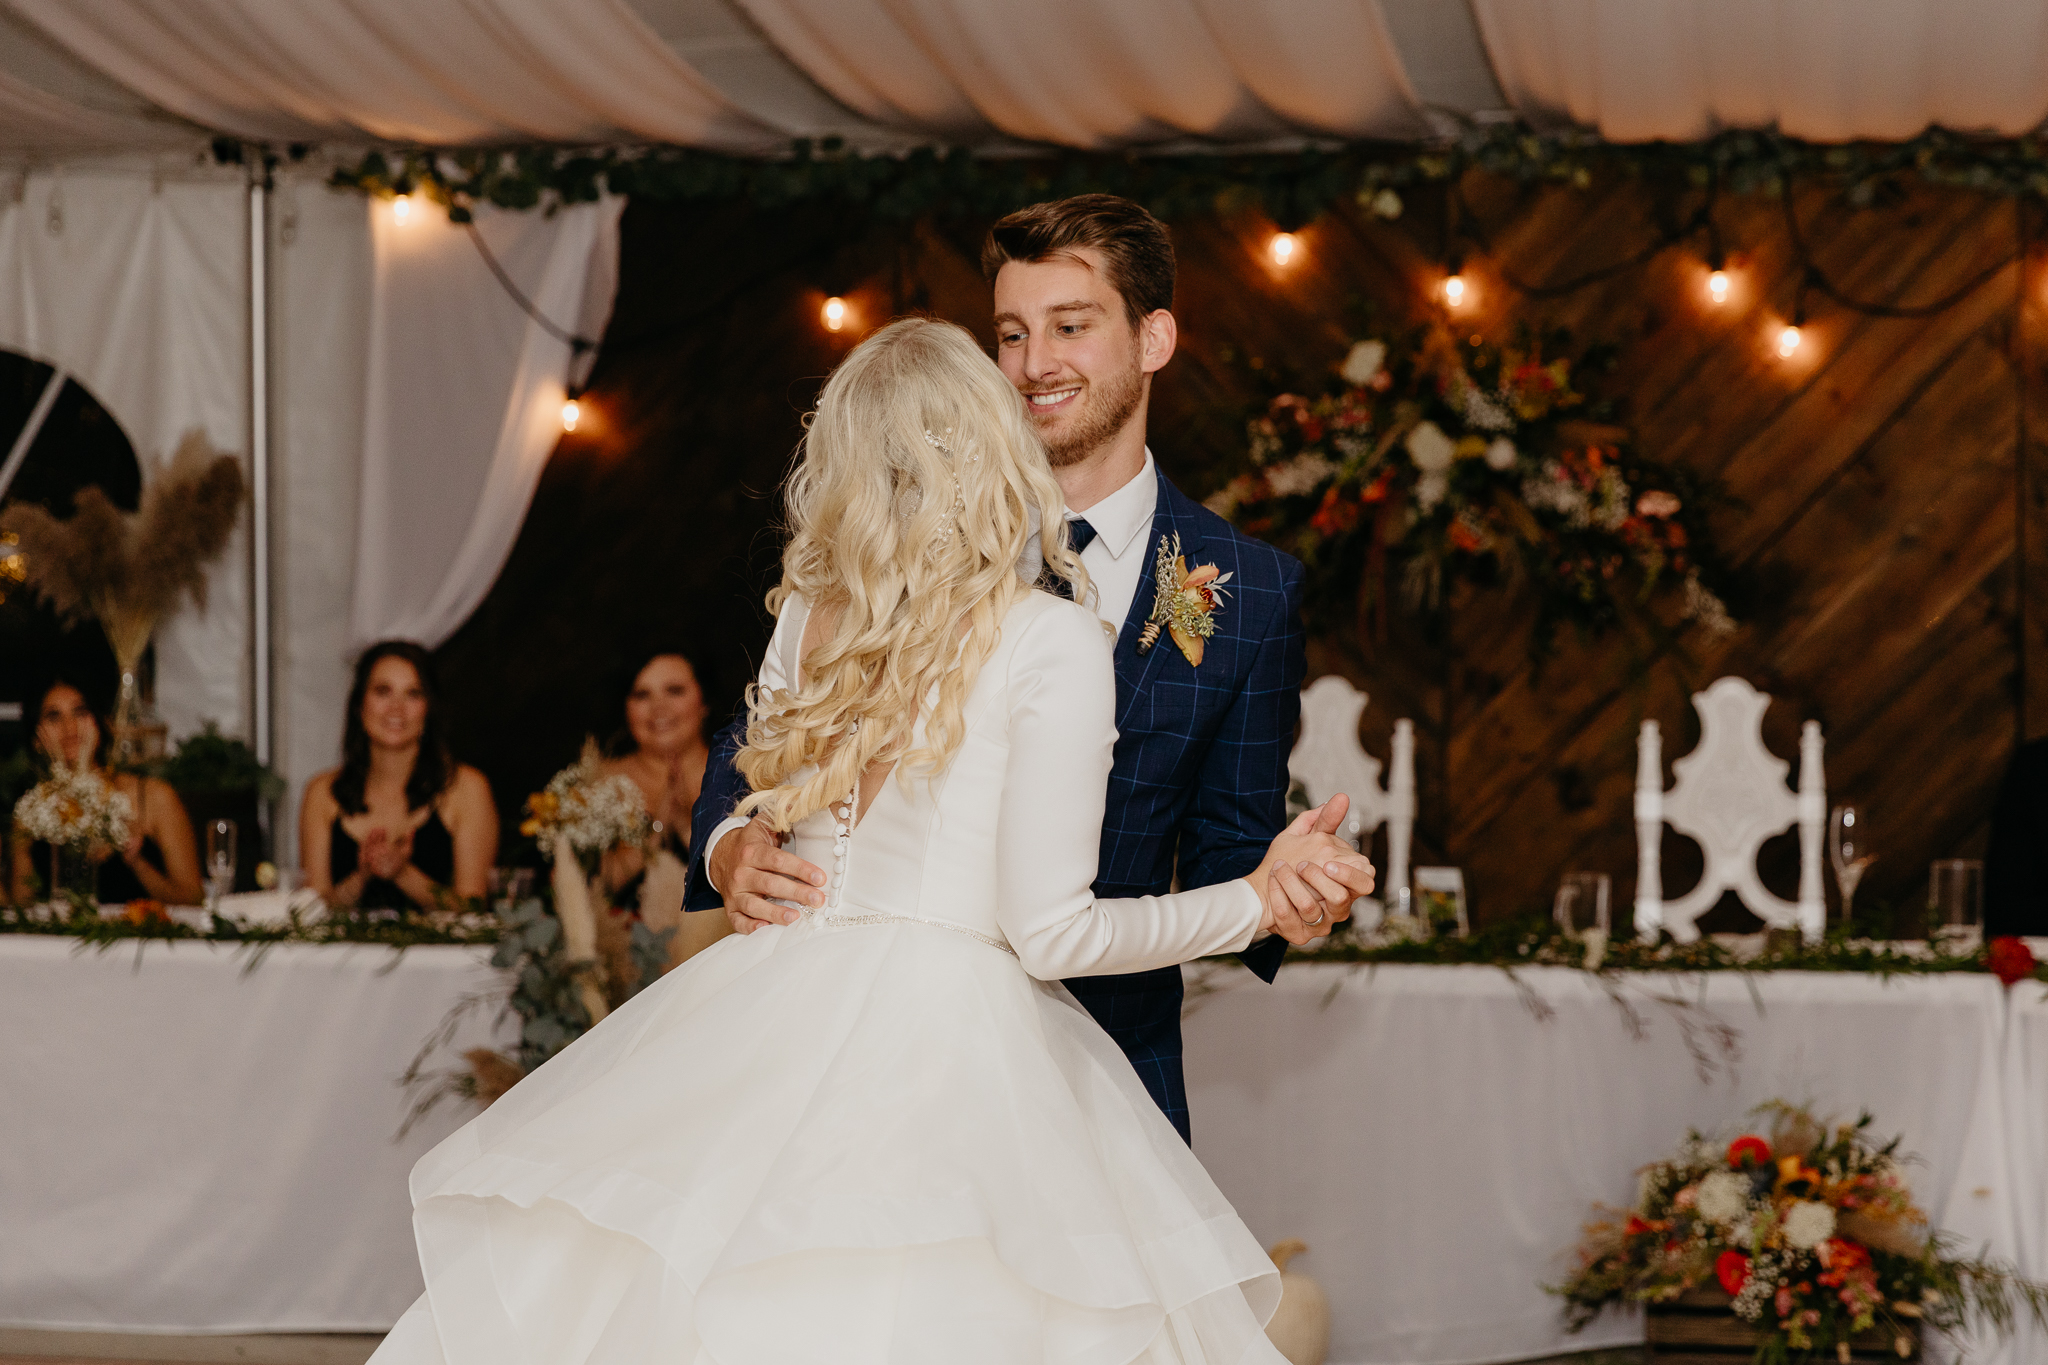 Bride and groom dancing together during their first dance, in a white tent wedding